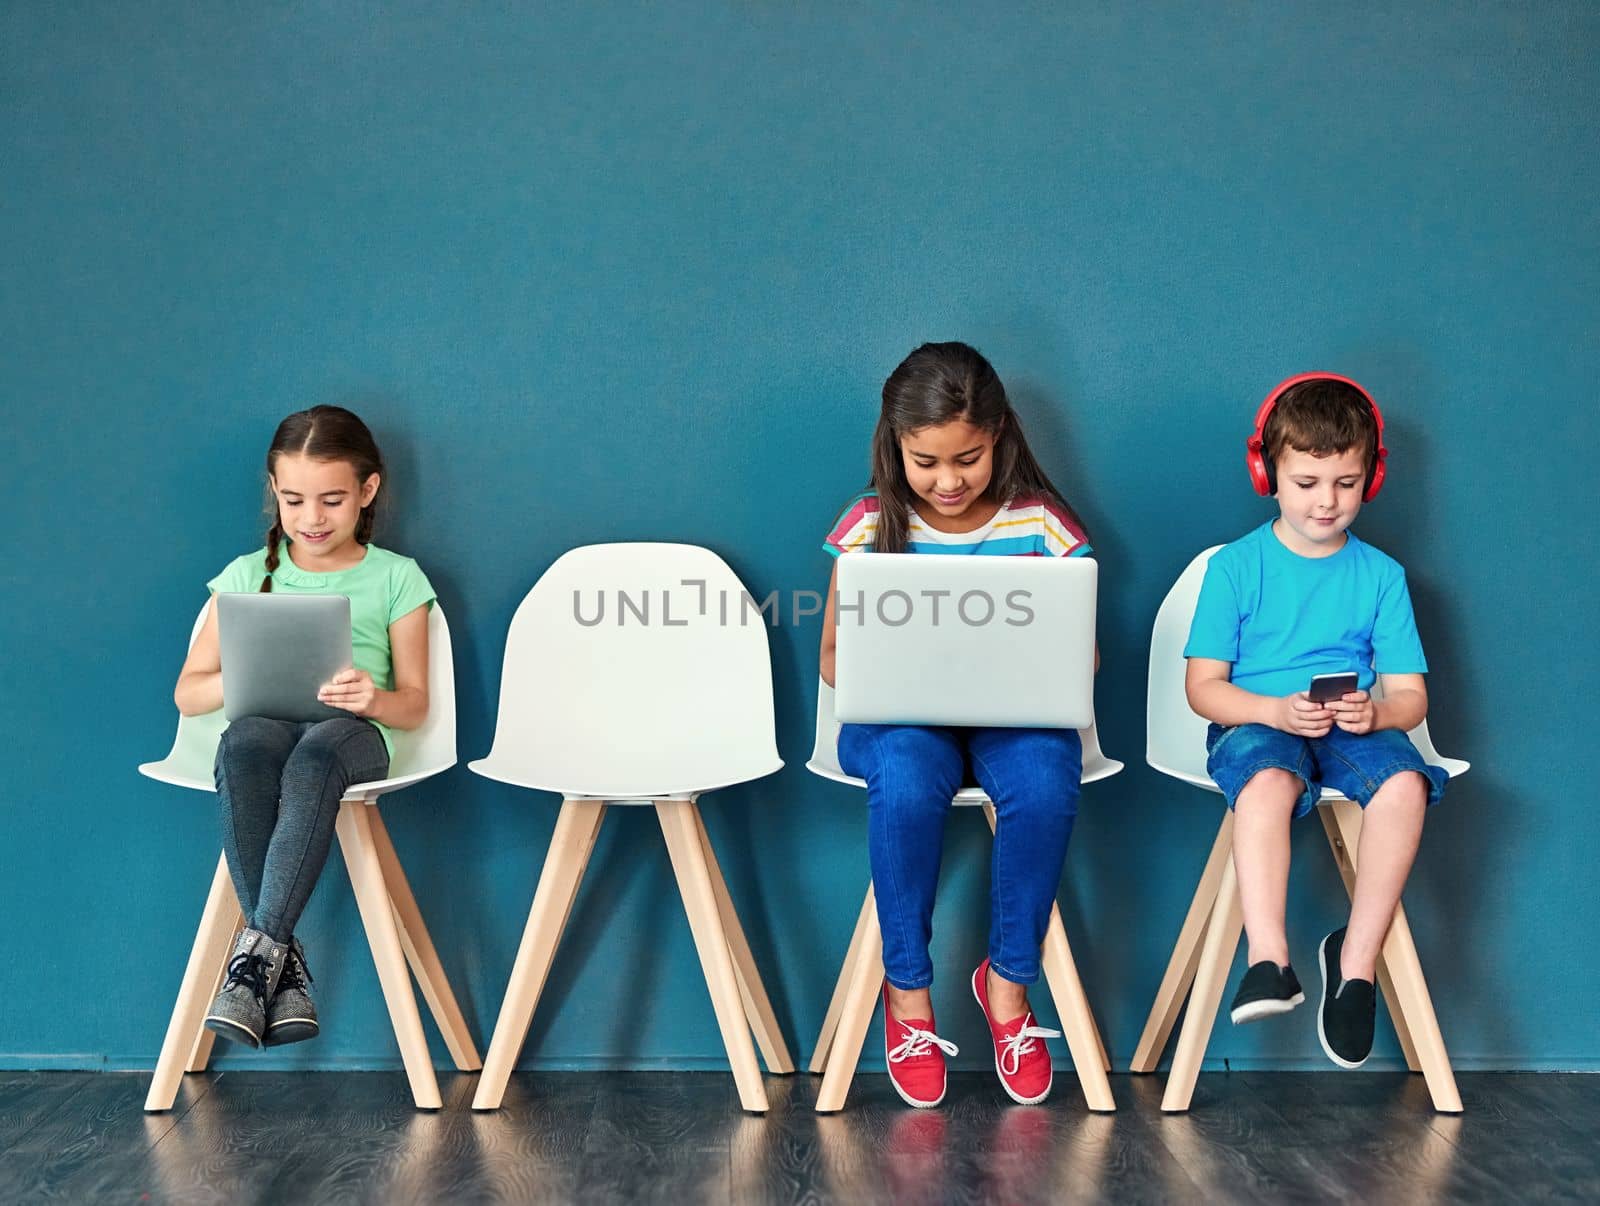 Growing up in a wireless world. Studio shot of kids sitting on chairs and using wireless technology against a blue background